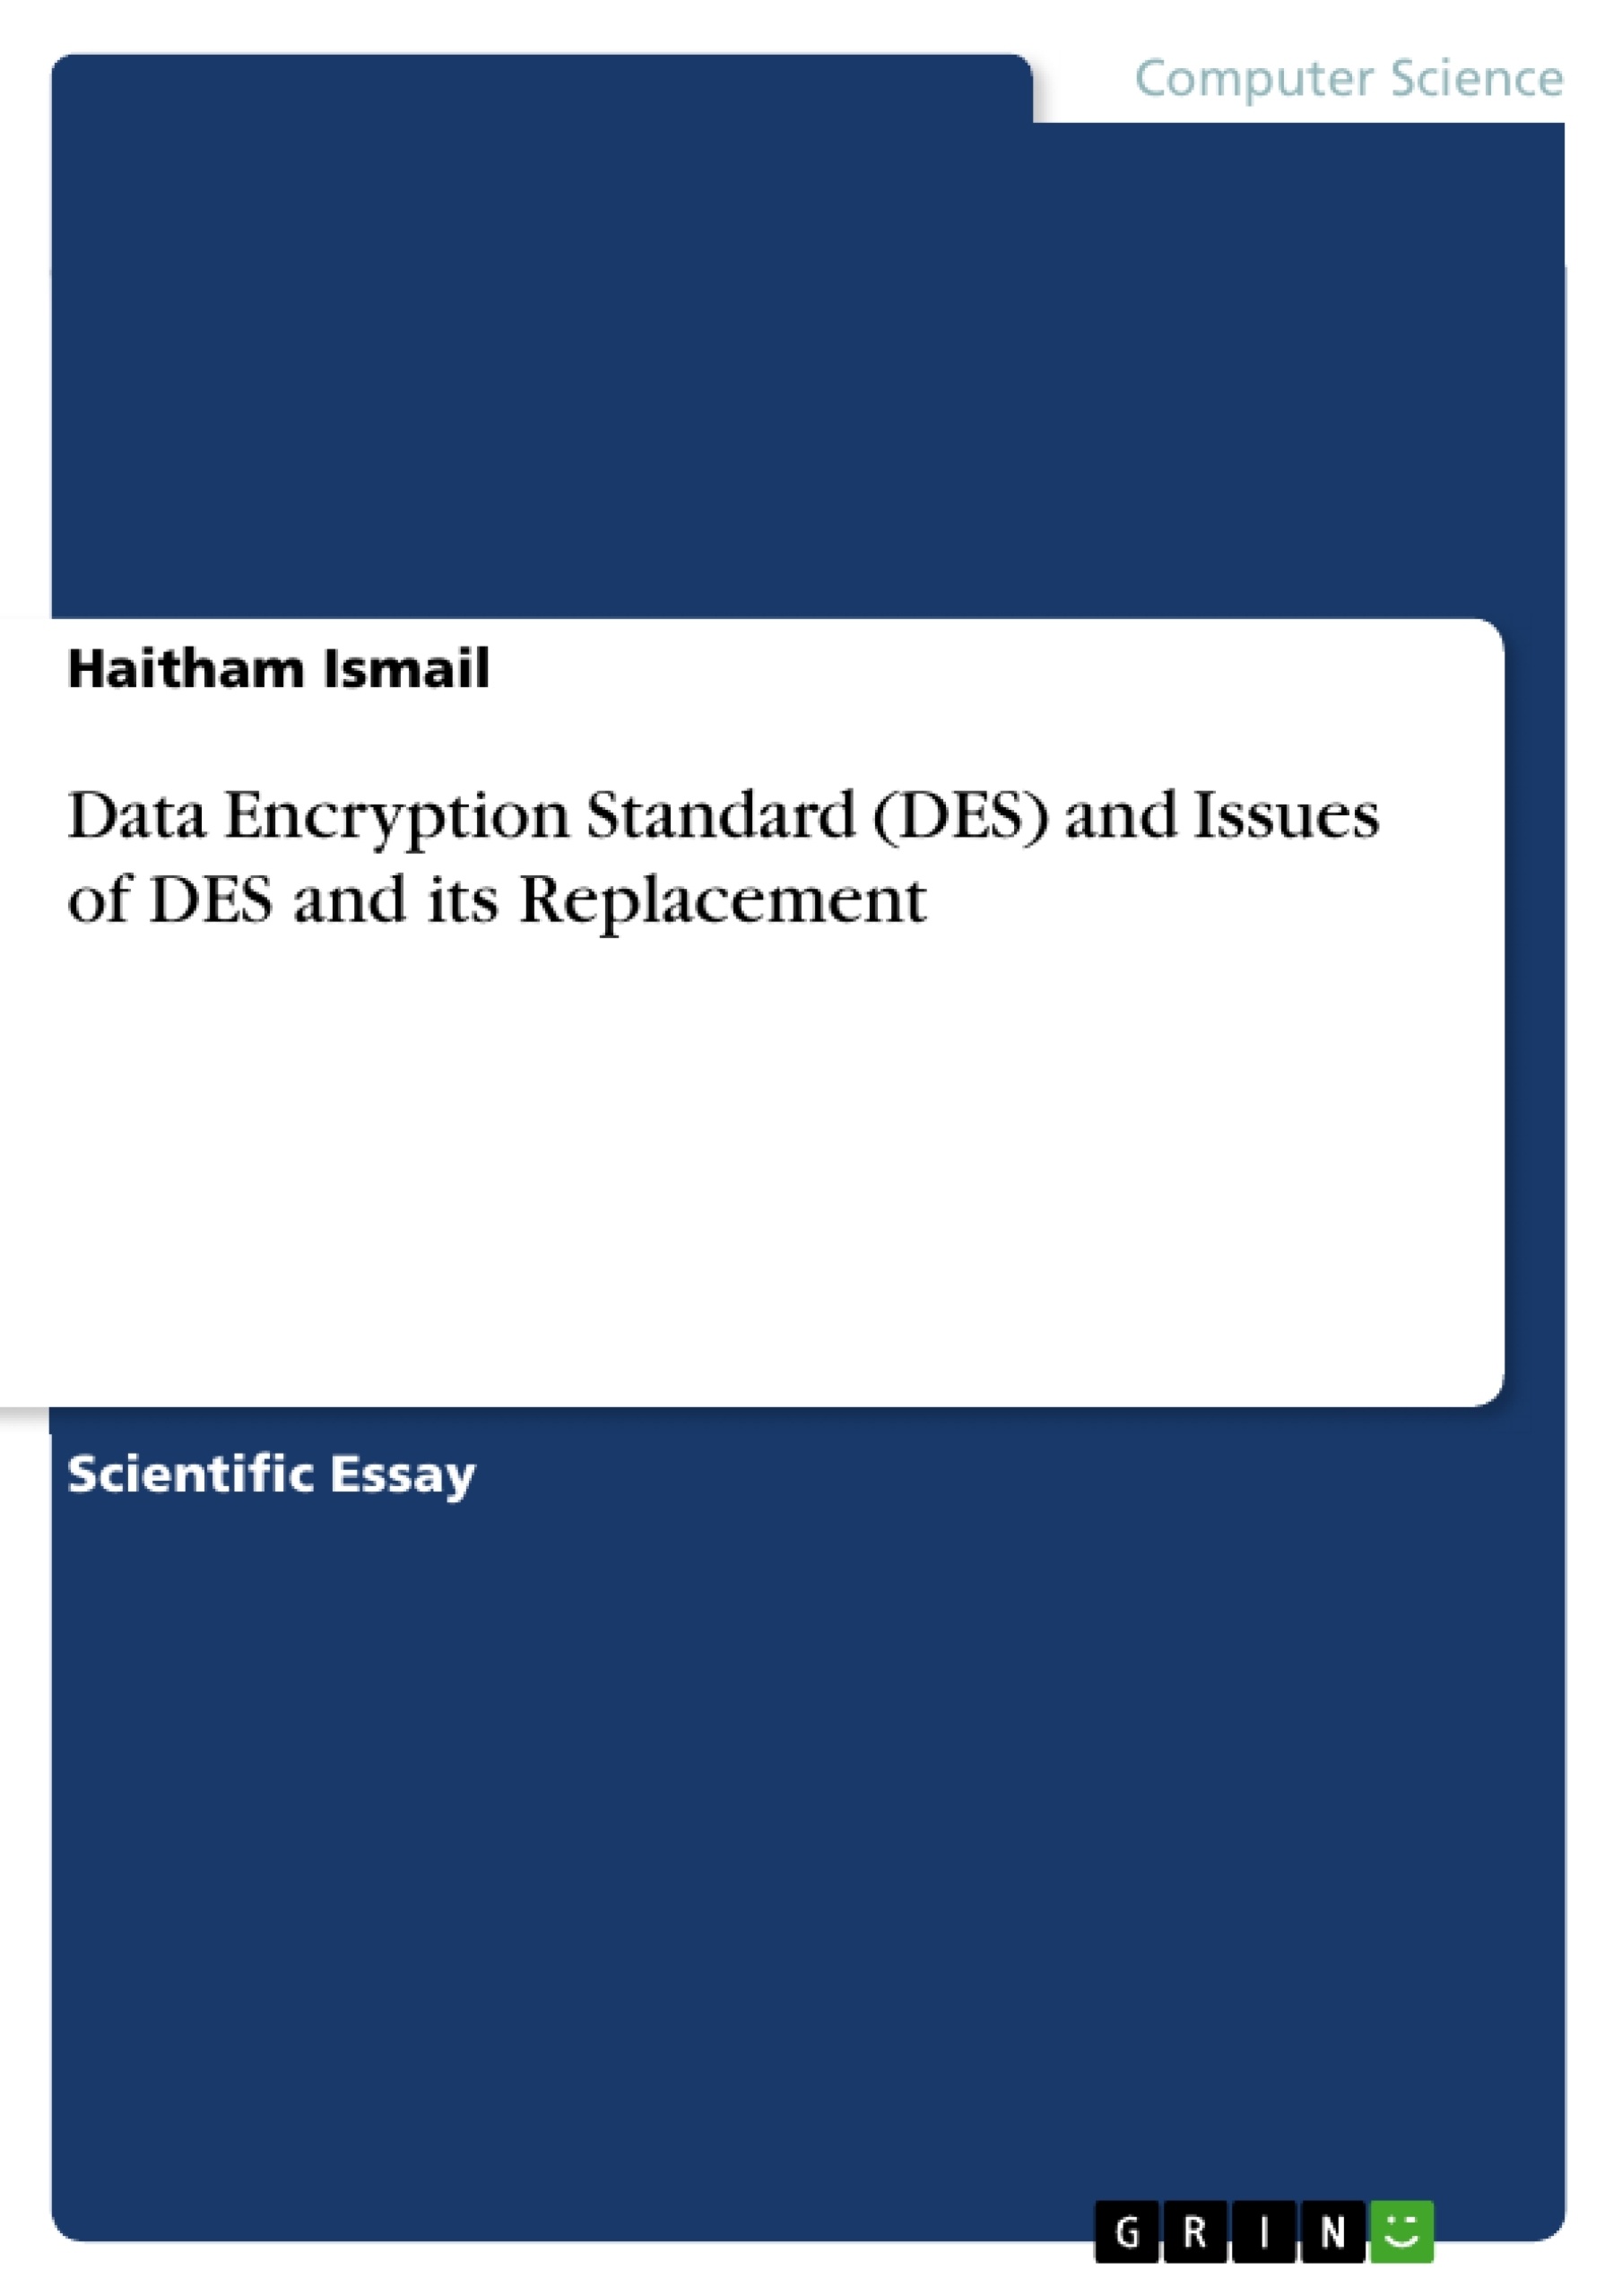 Title: Data Encryption Standard (DES) and Issues of DES and its Replacement